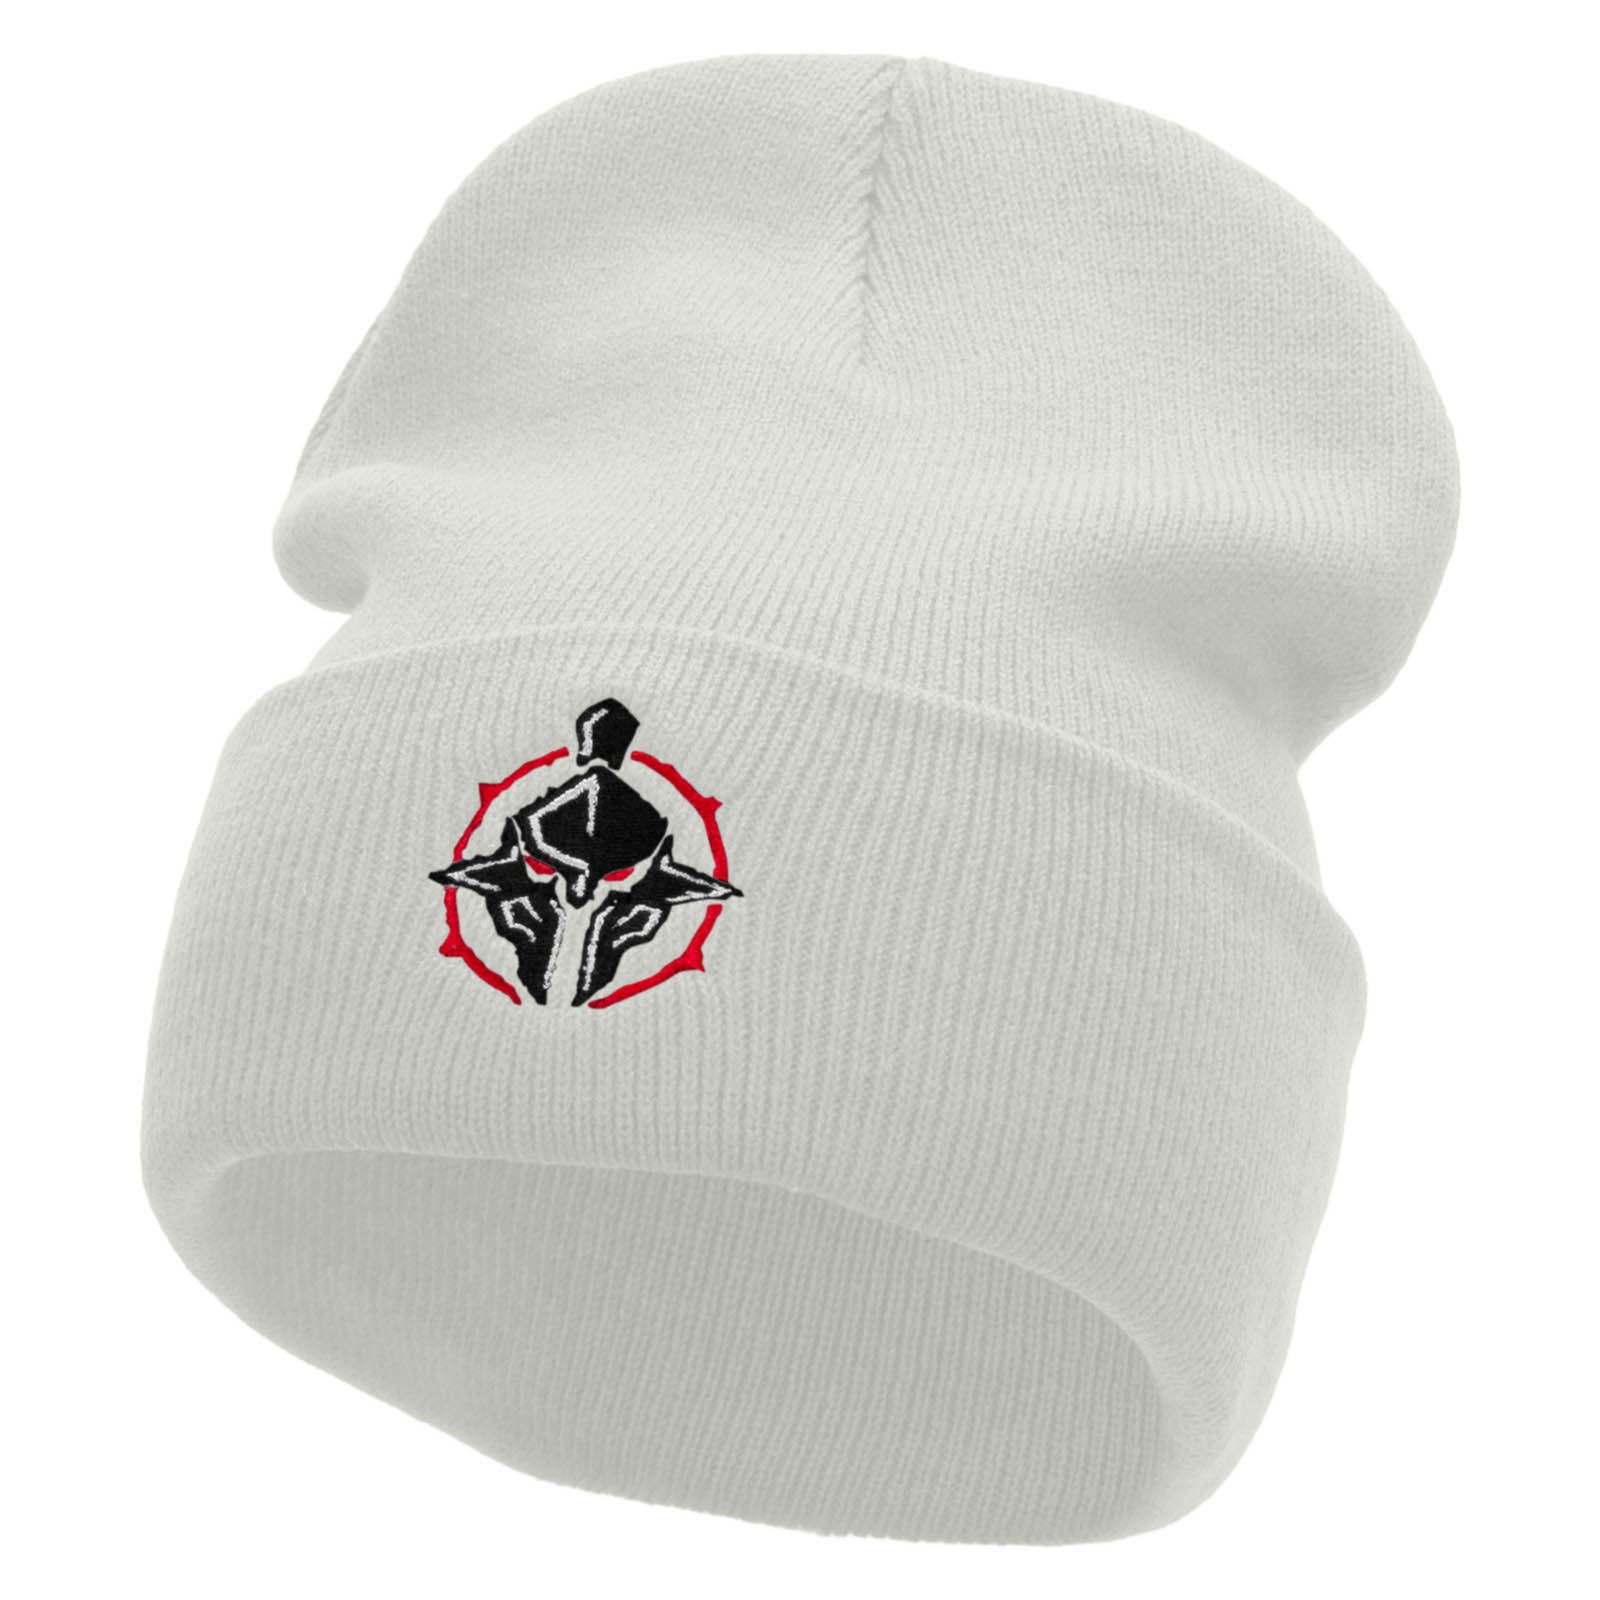 Gladiator Embroidered 12 Inch Long Knitted Beanie - White OSFM